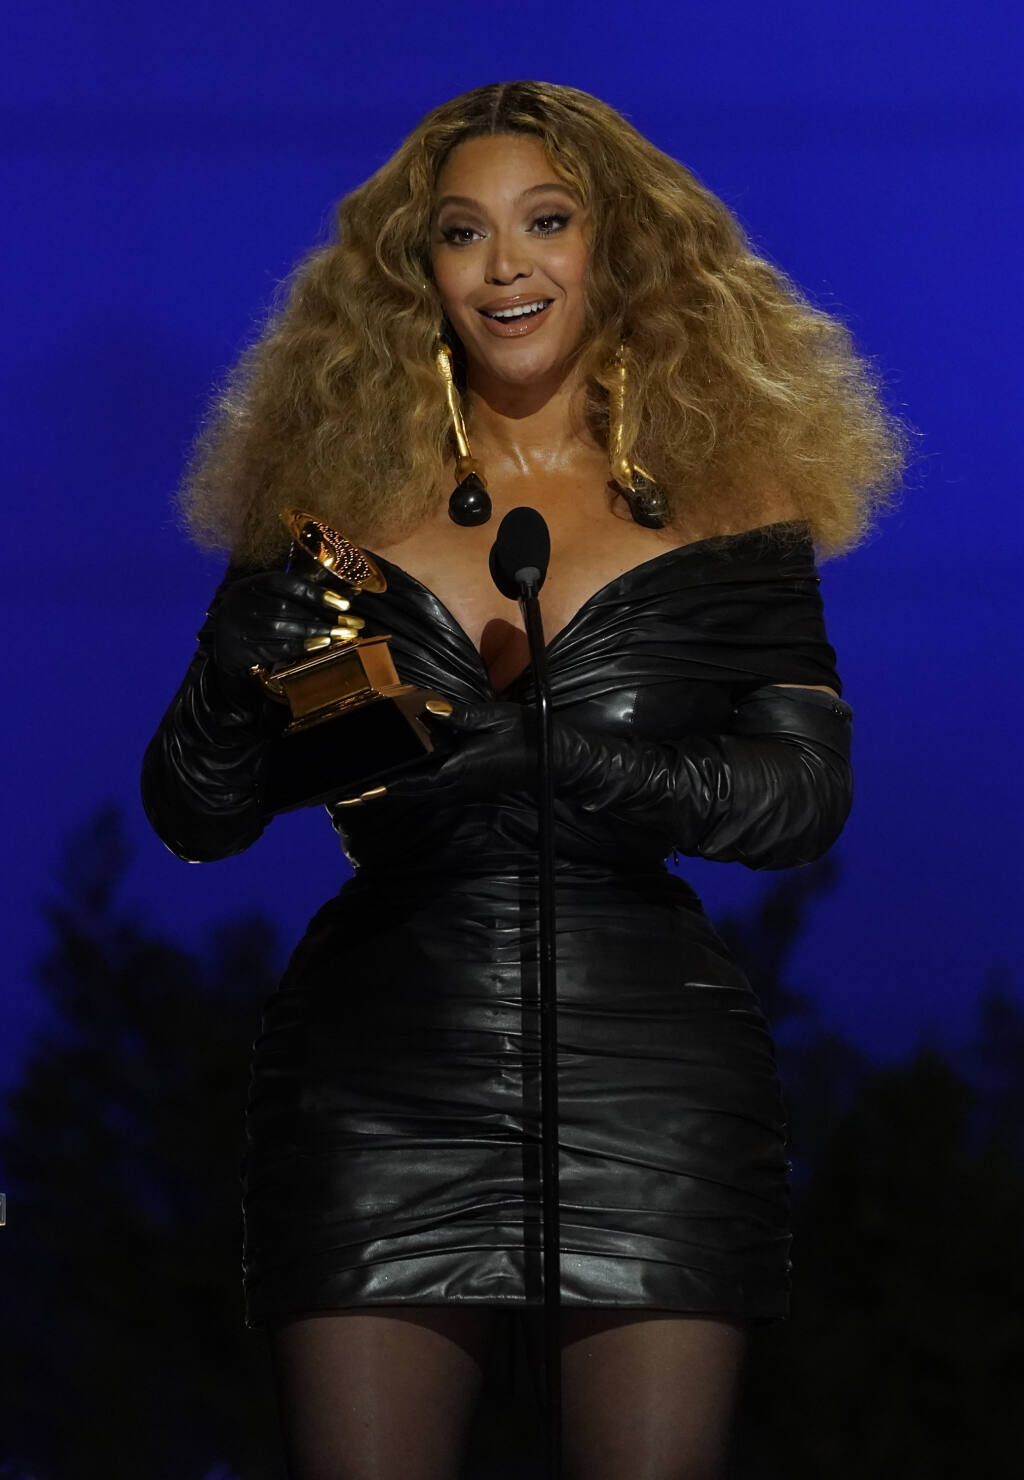 Beyoncé first woman to earn 28 Grammys, Taylor Swift wins album of the year